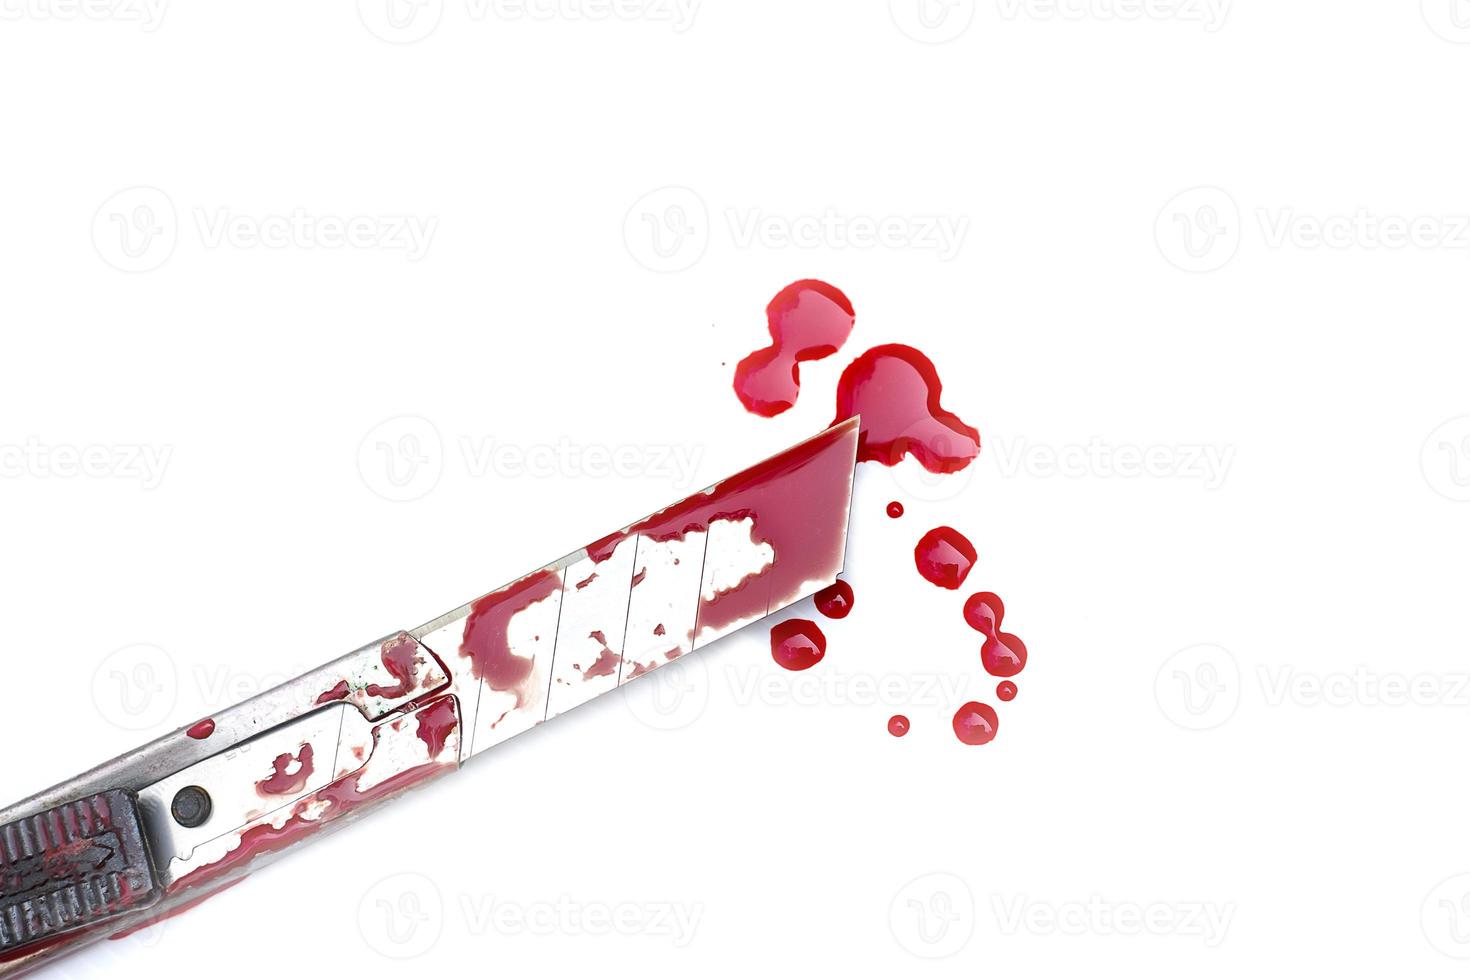 Cutter knife bloody on white background, Social violence Halloween concept photo